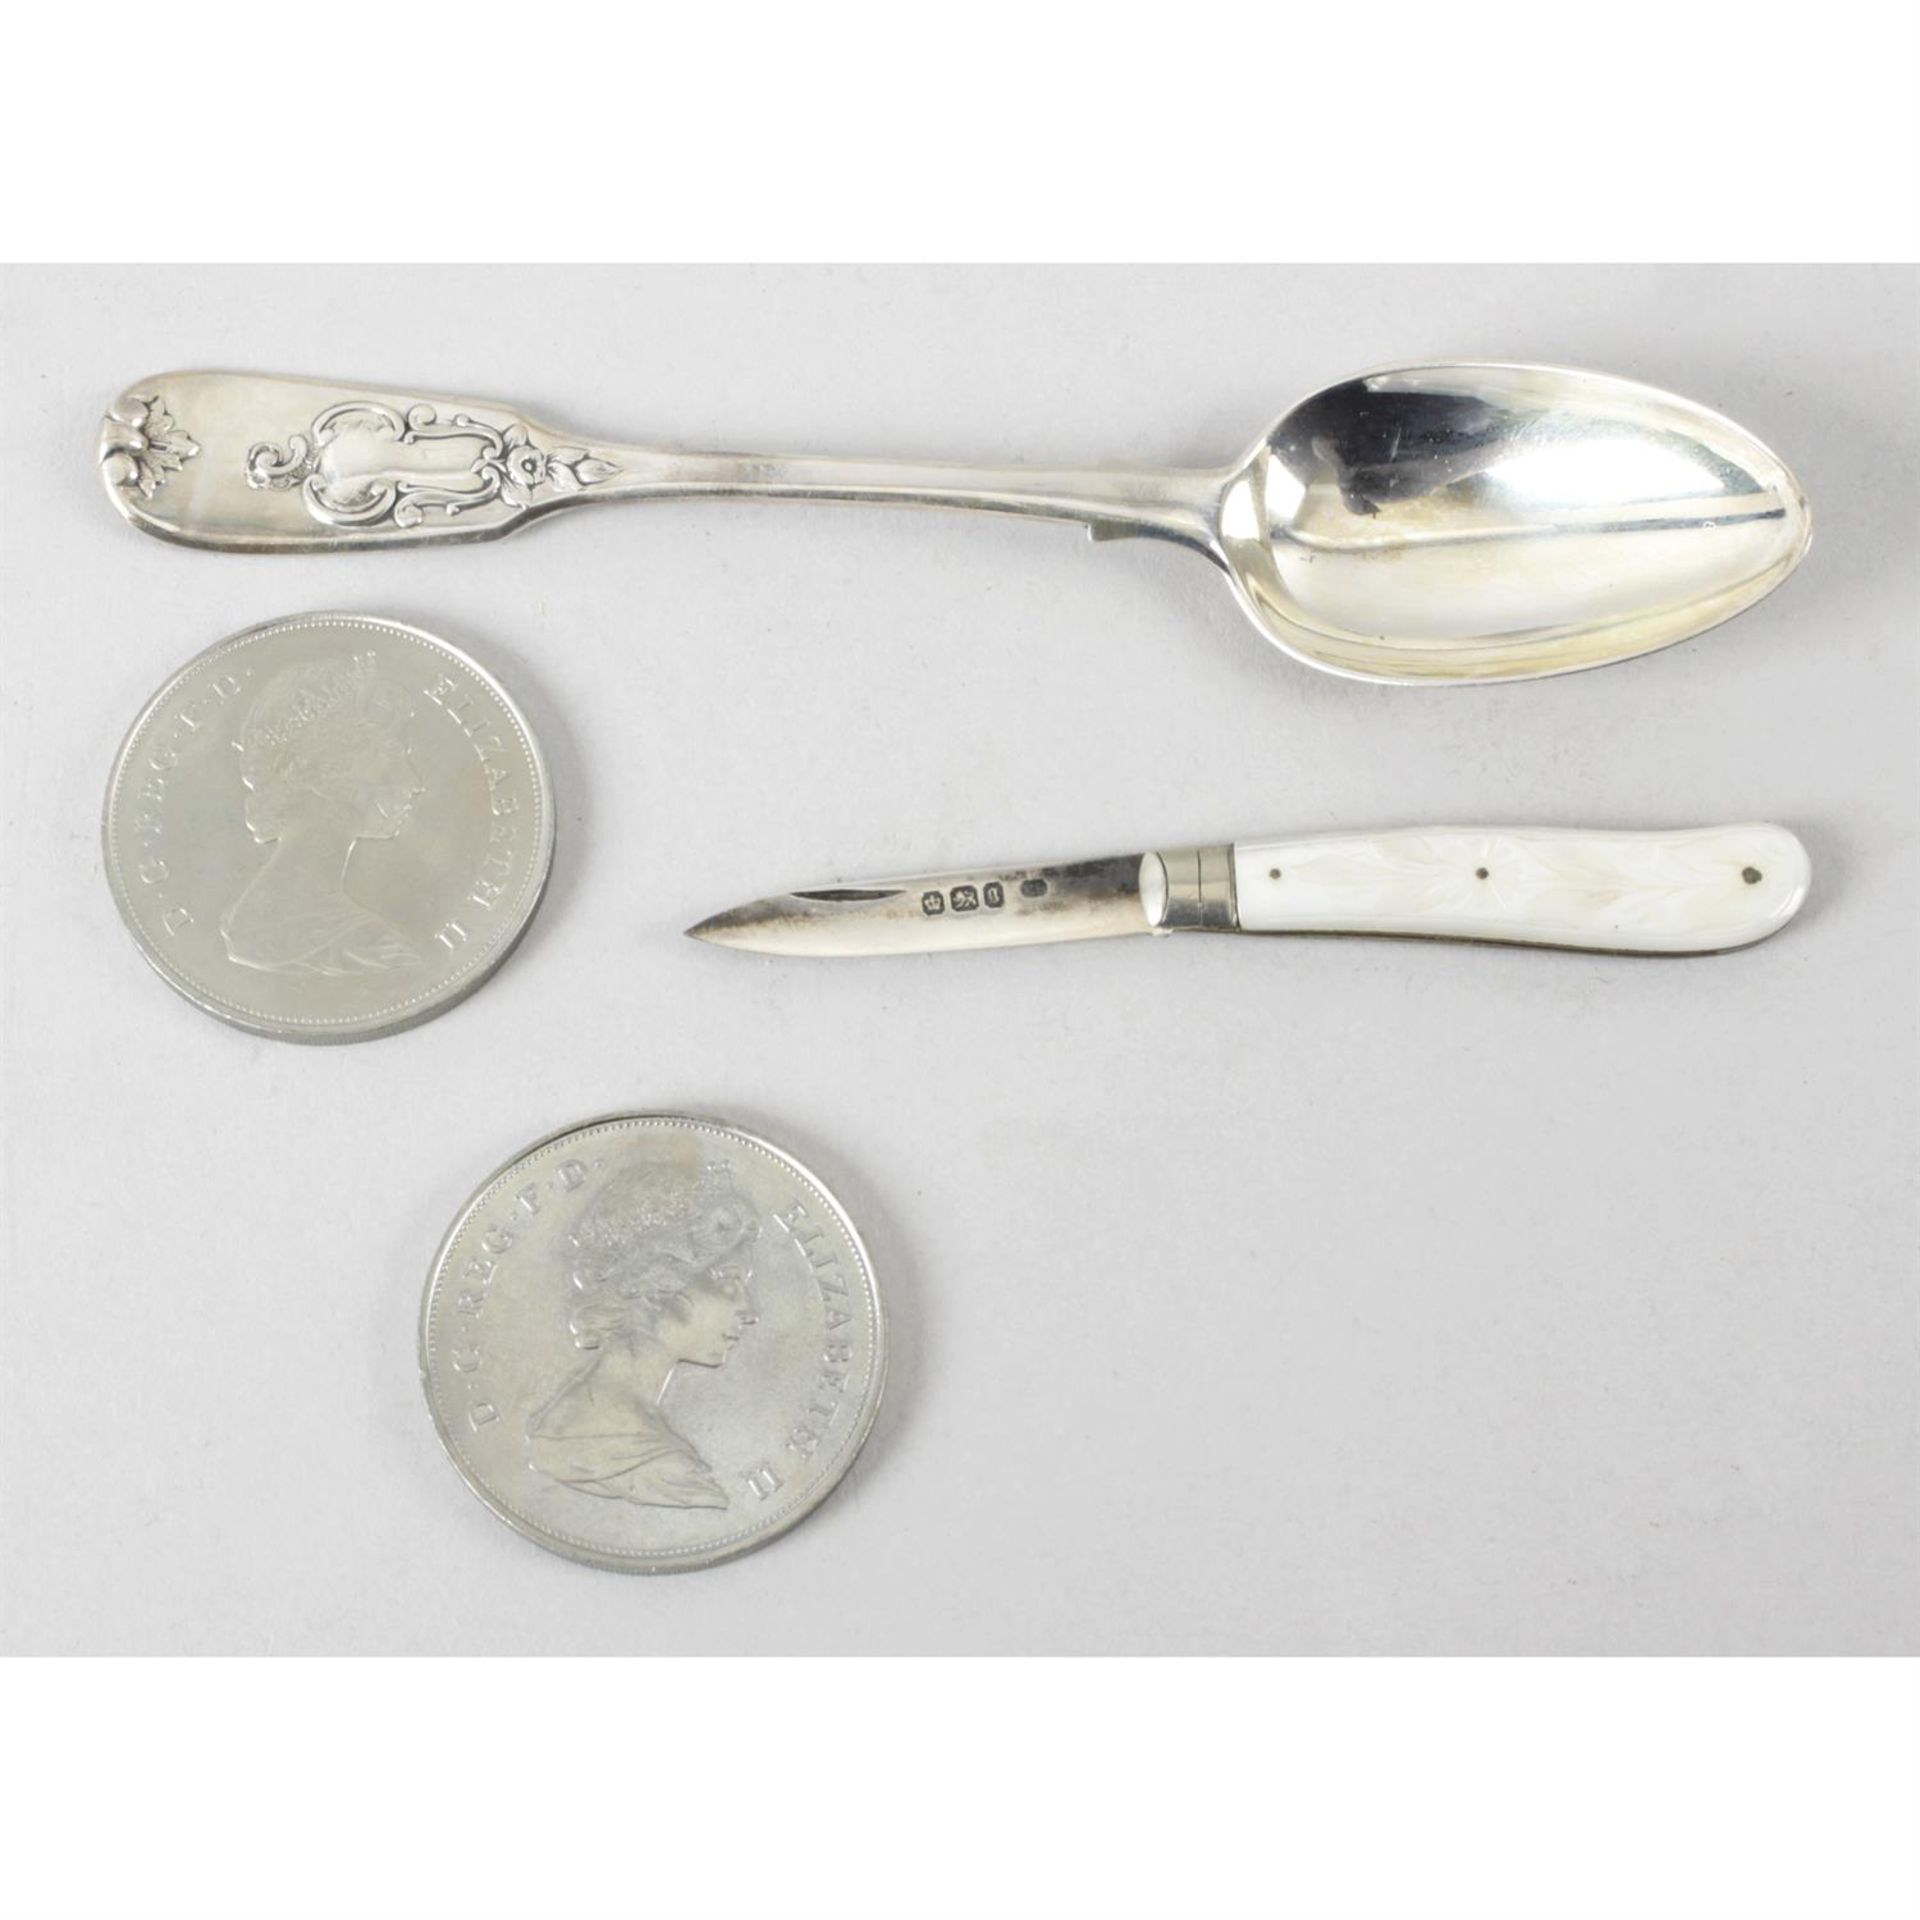 A small silver hallmarked fruit knife and silver spoon, with two commemorative crowns.